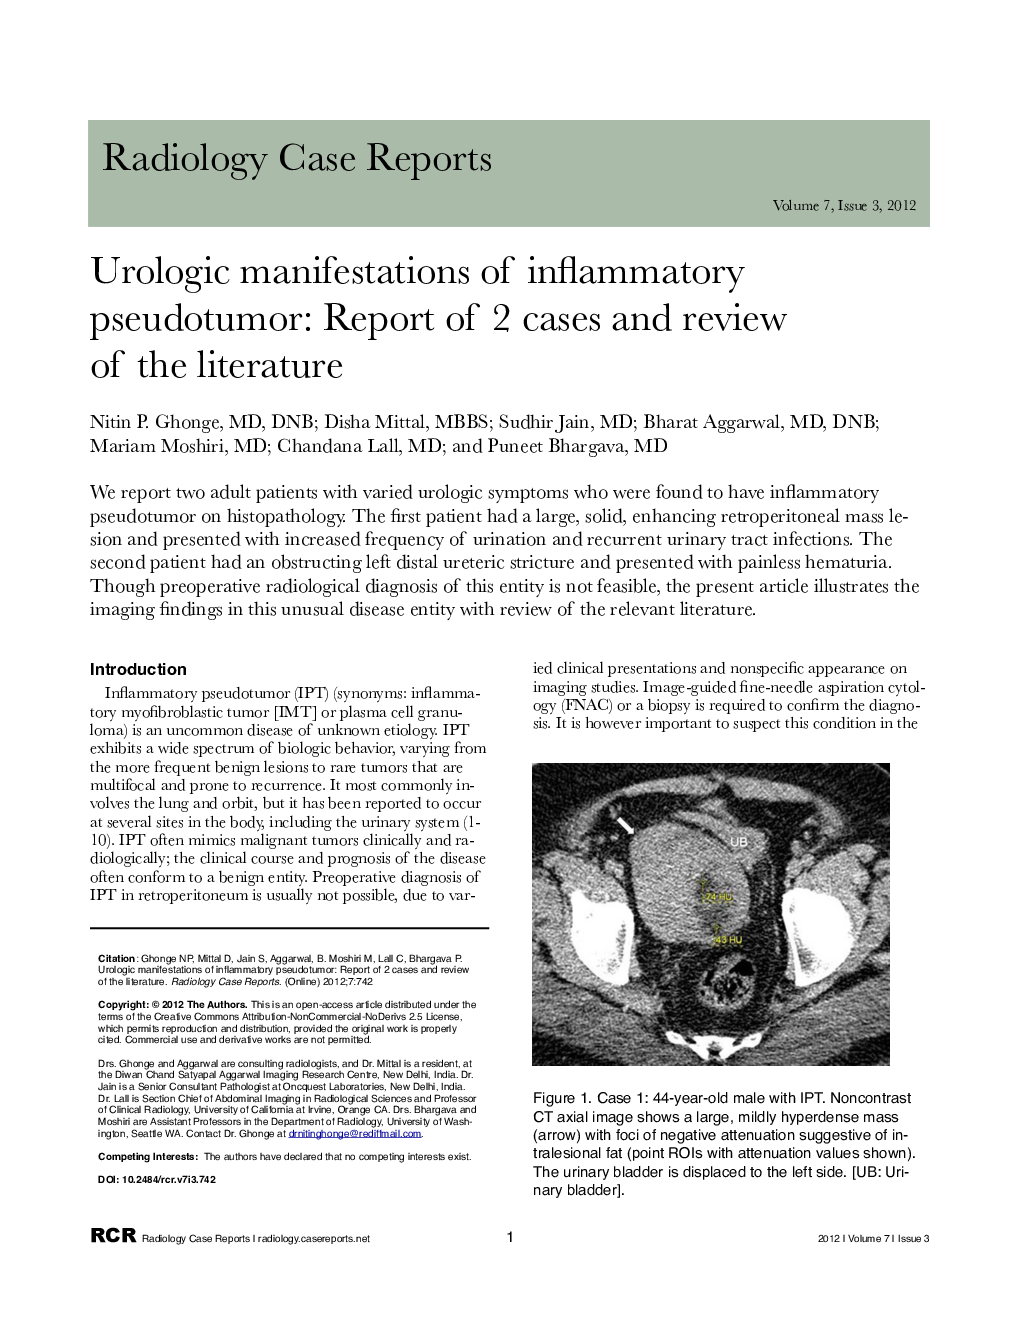 Urologic manifestations of inflammatory pseudotumor: Report of 2 cases and review of the literature